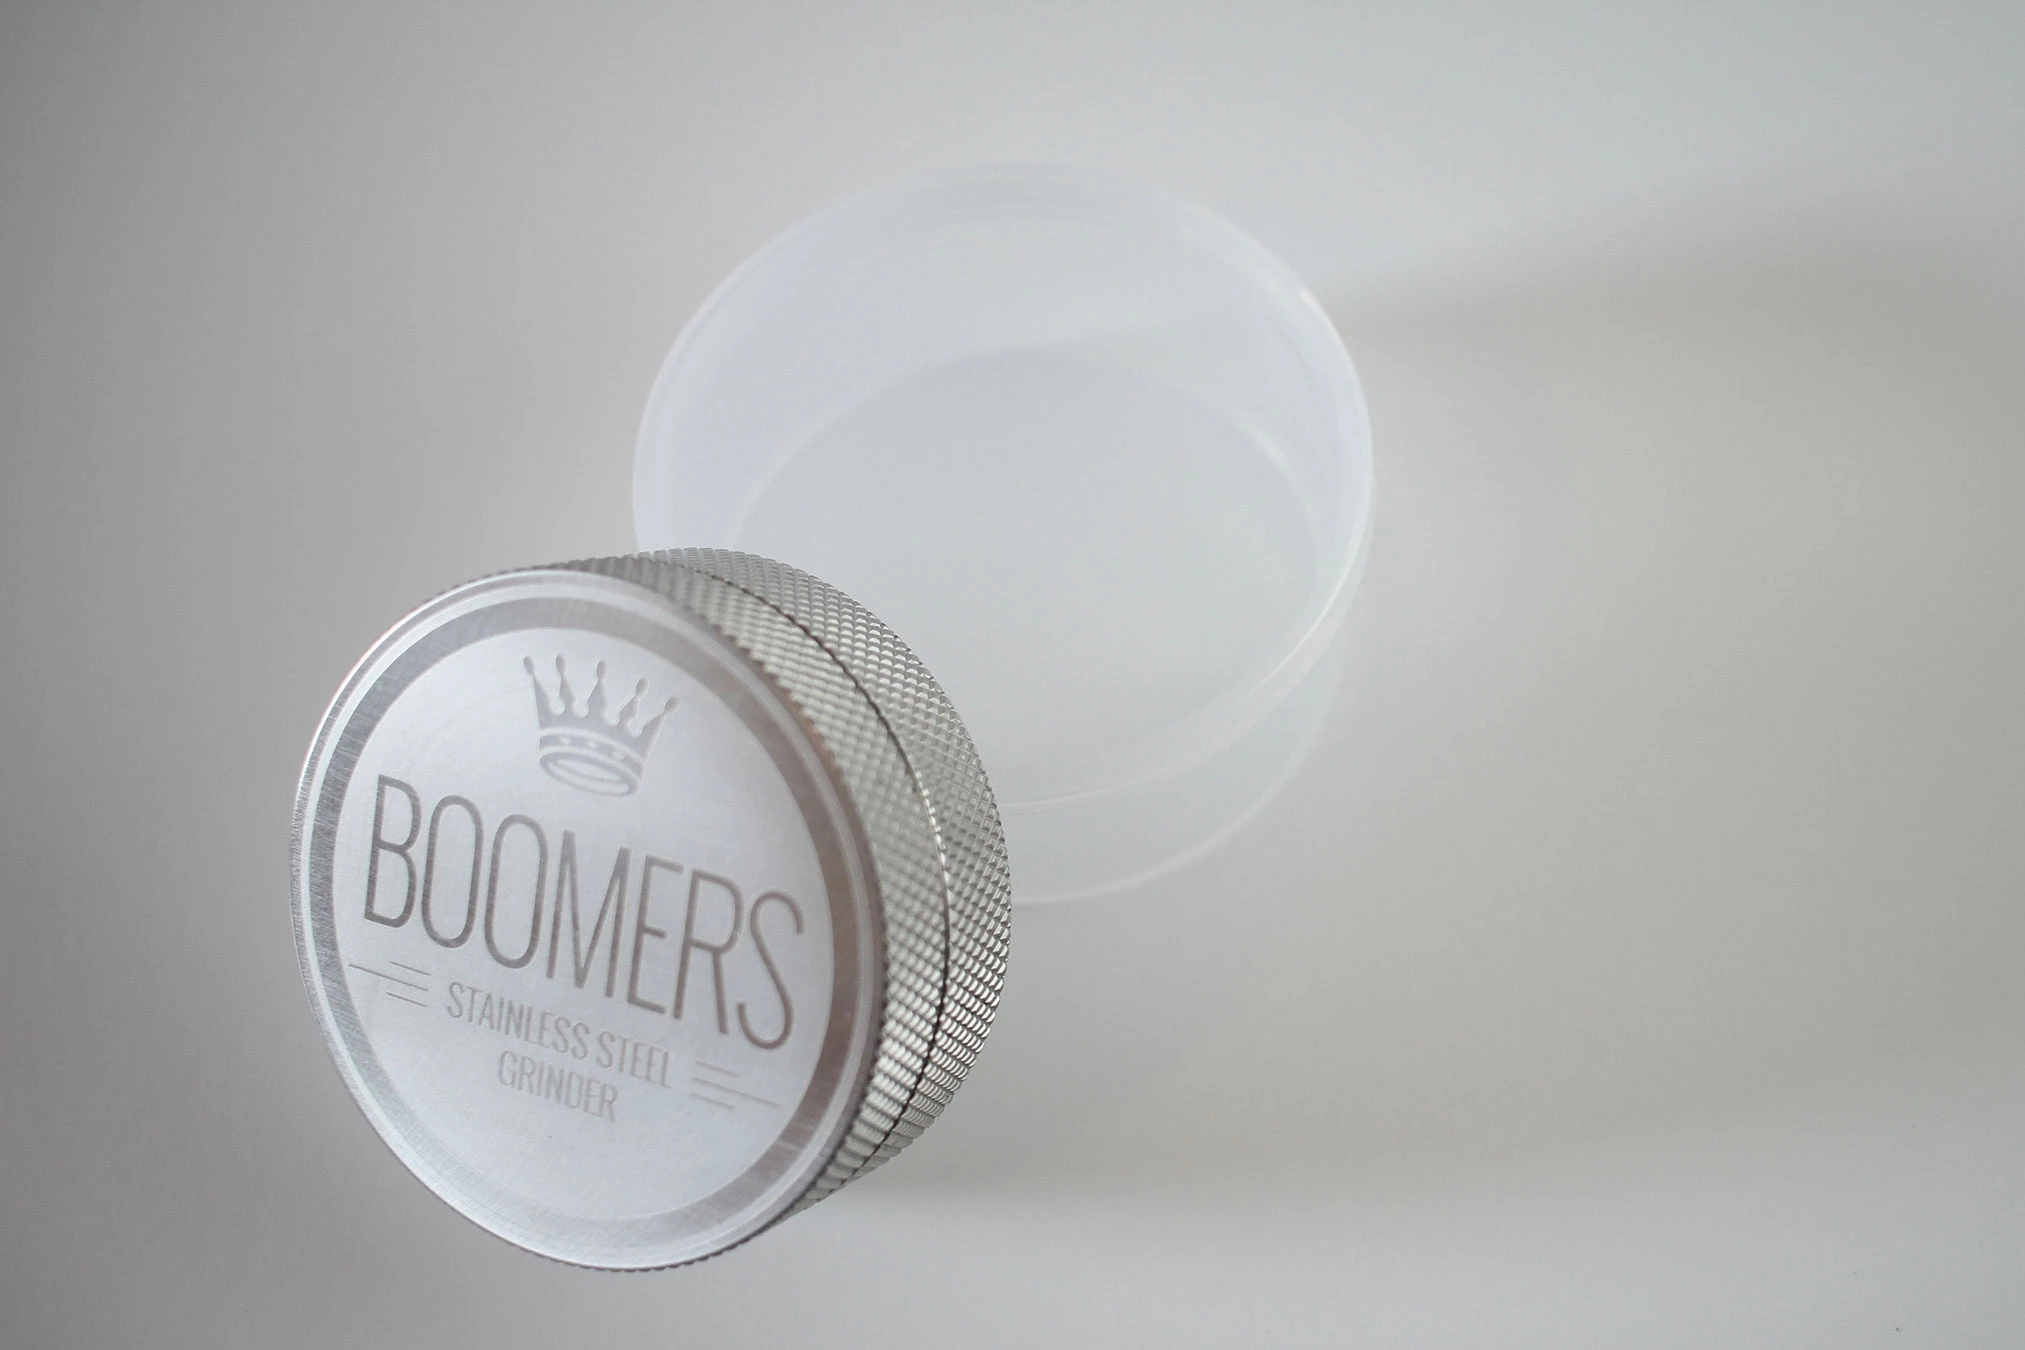 boomers stainless steel grinder